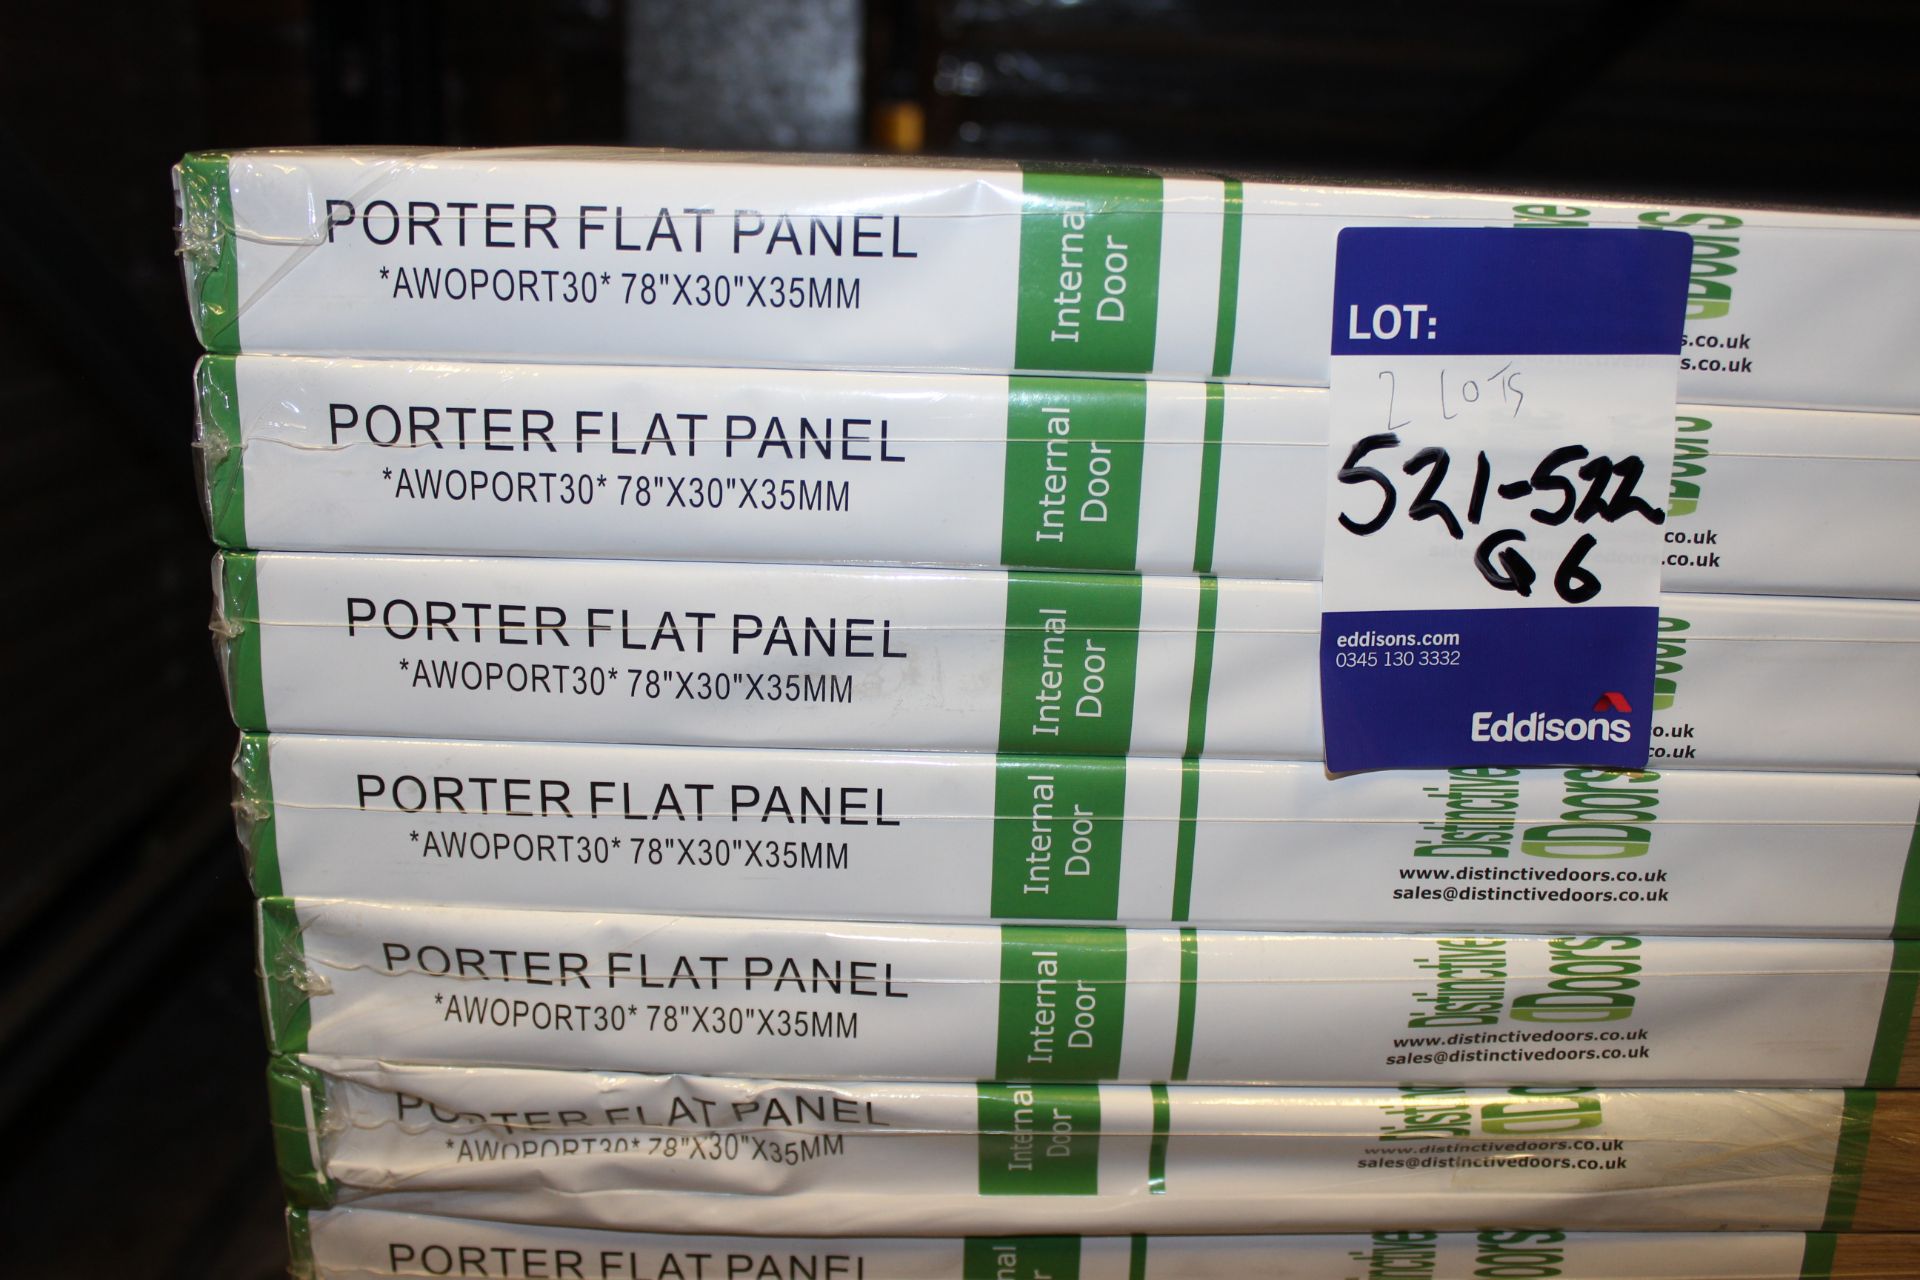 6 x Porter Flat Panel AWOPORT30 78”x30”x35mm Internal Door - Lots to be handed out in order they are - Image 3 of 3